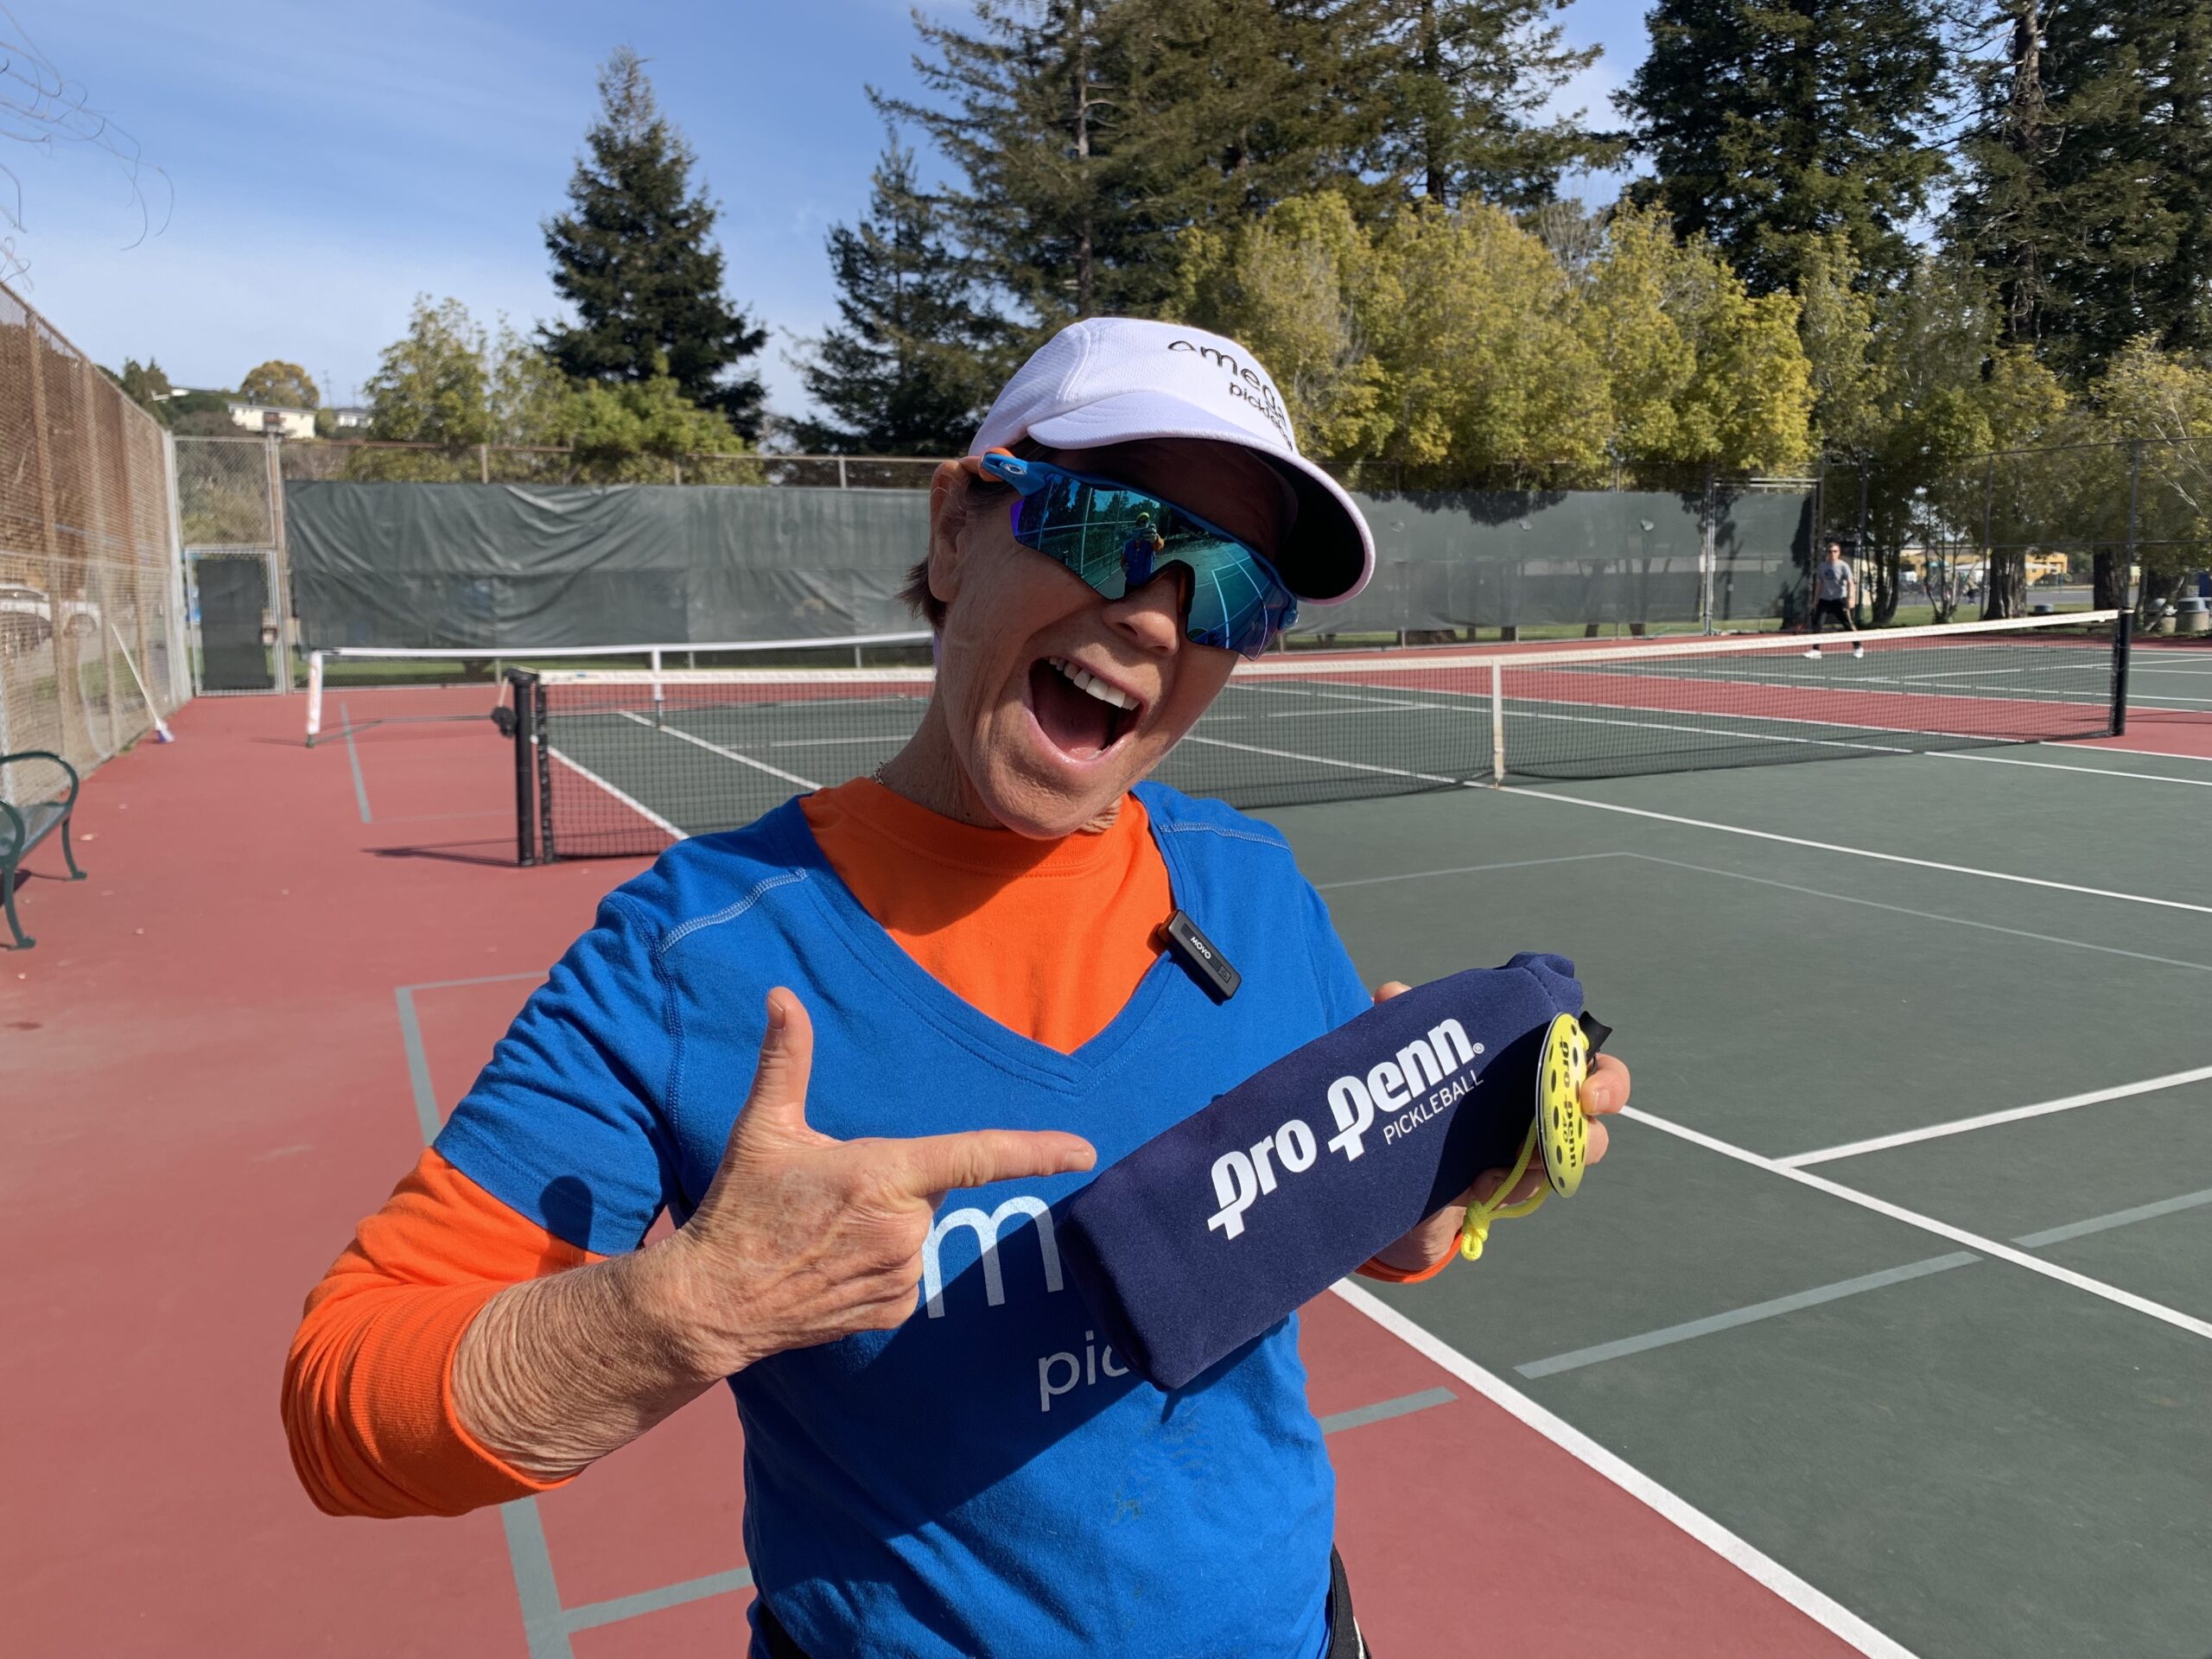 Basic Info About Pickleball Balls for Newbies